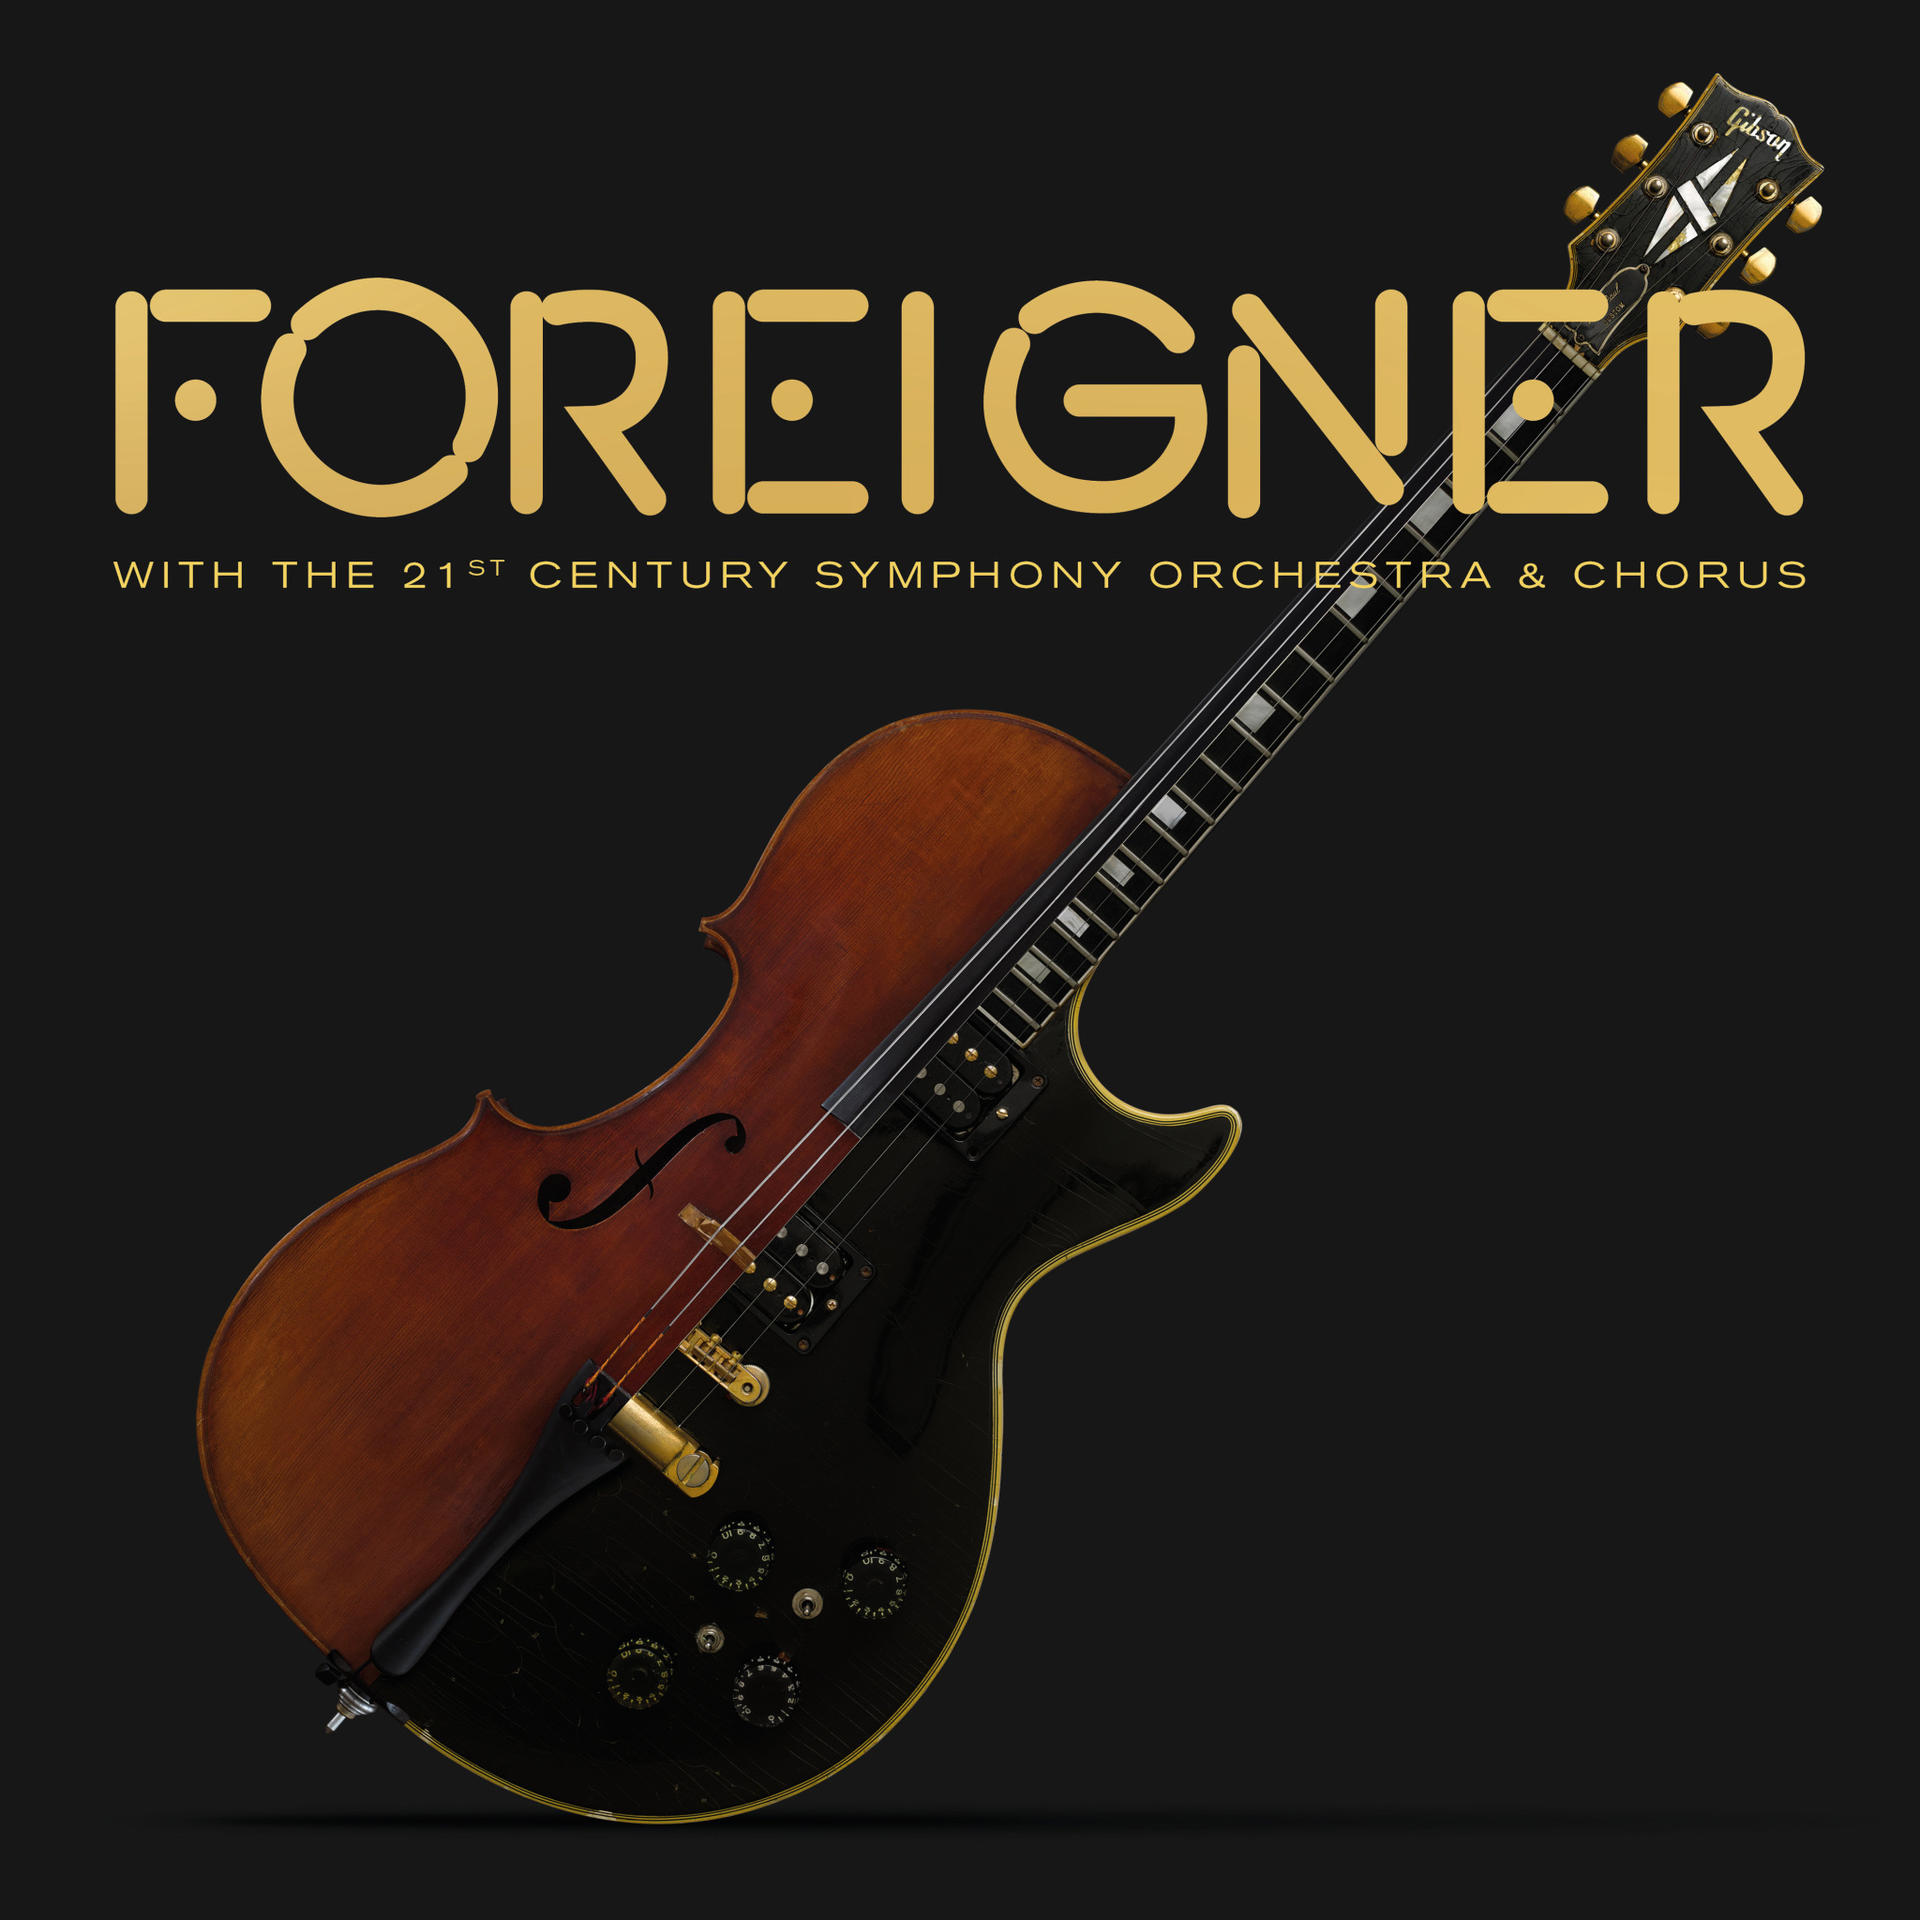 Foreigner - With The 21st Orchestra - (Vinyl) & Chorus Century Symphony